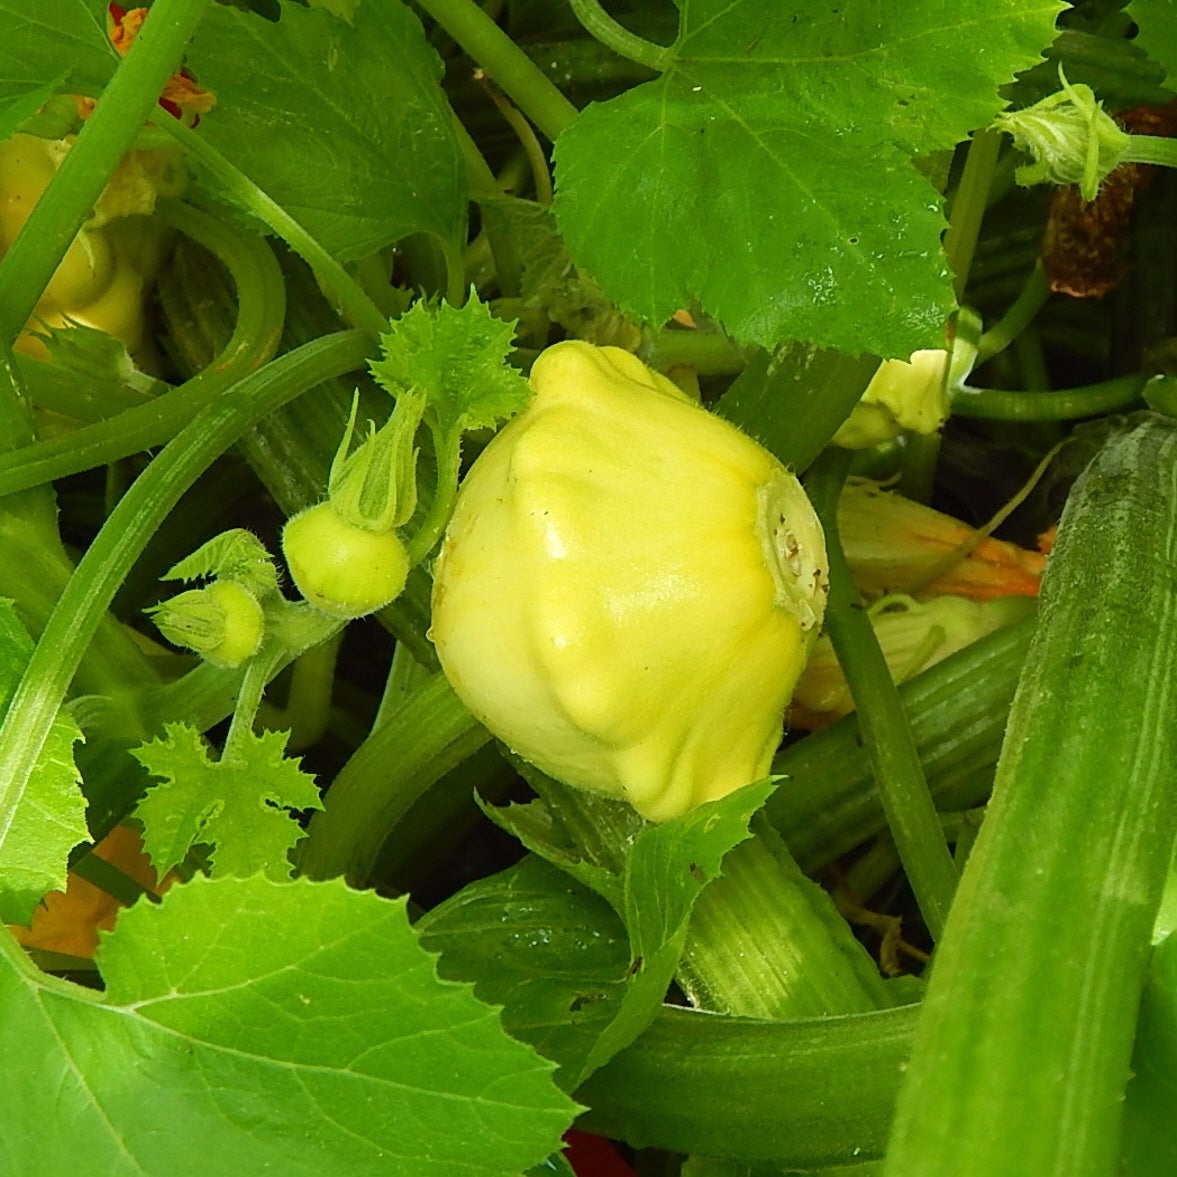 Scallop Yellow Bush Squash, 30 Heirloom Seeds Per Packet, Non GMO Seeds